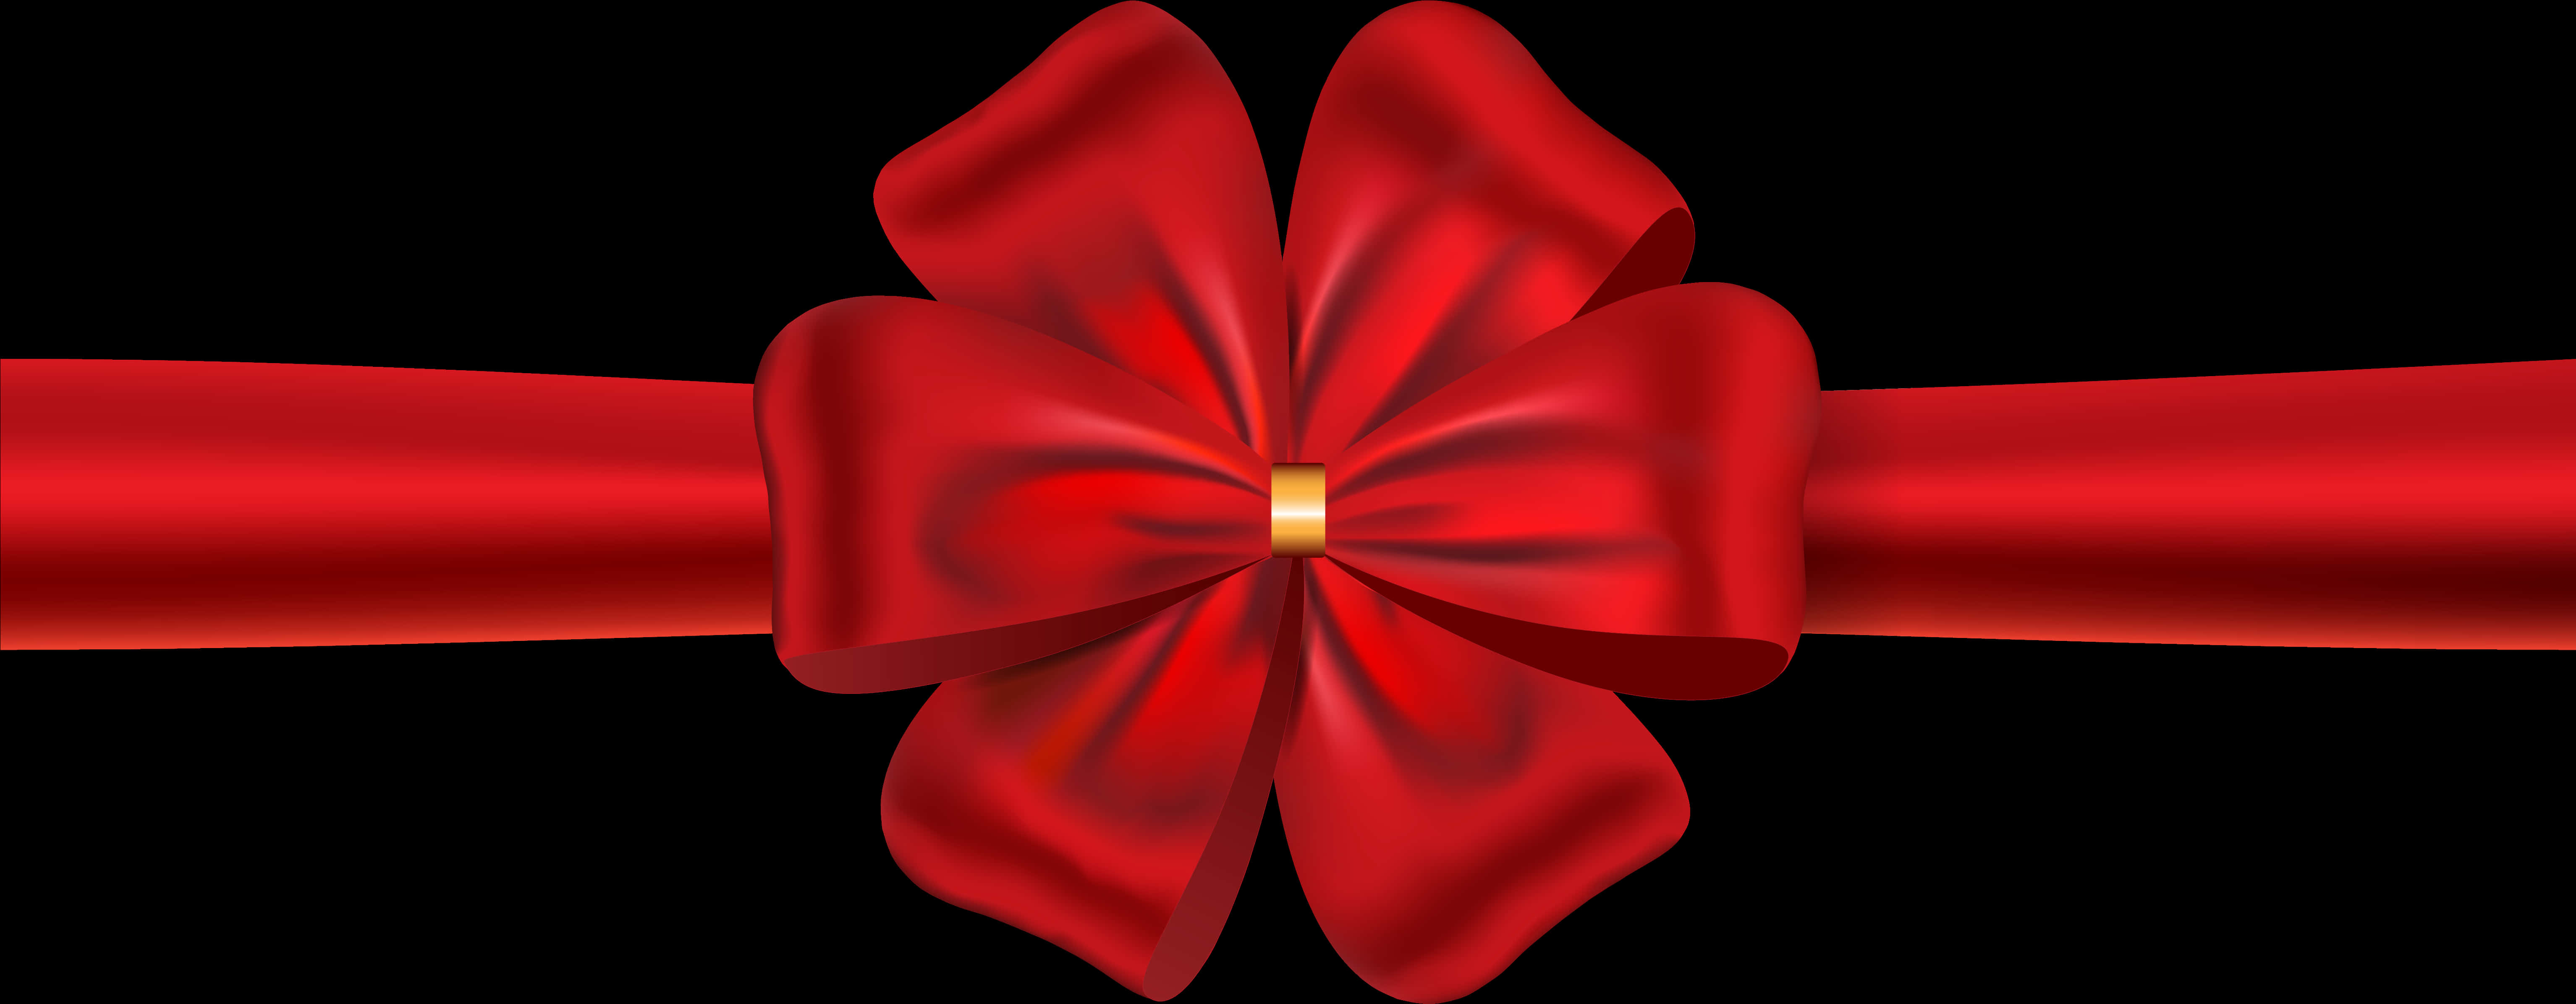 Red Satin Gift Bow PNG image